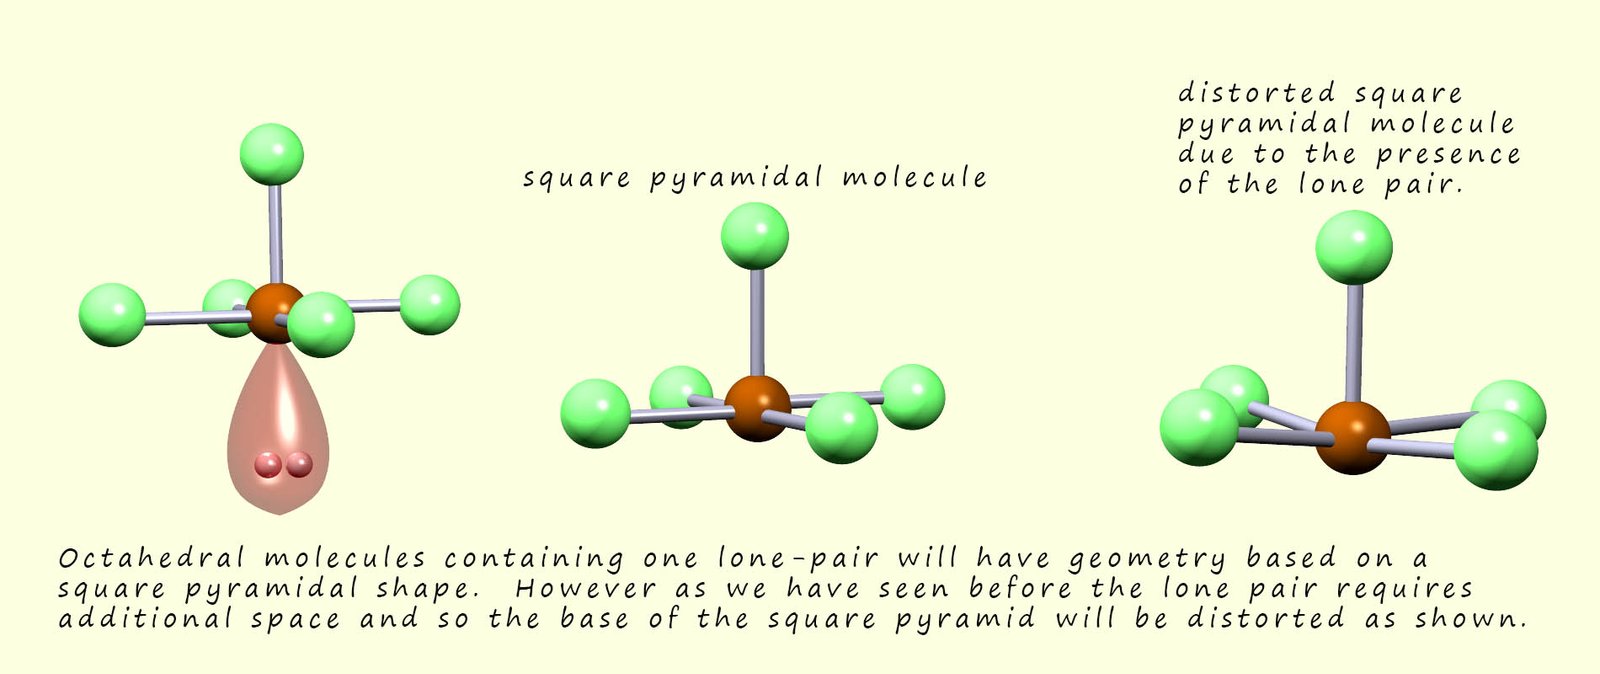 The presence of a lone pair of electrons will distort the base of square pyramidal molecule